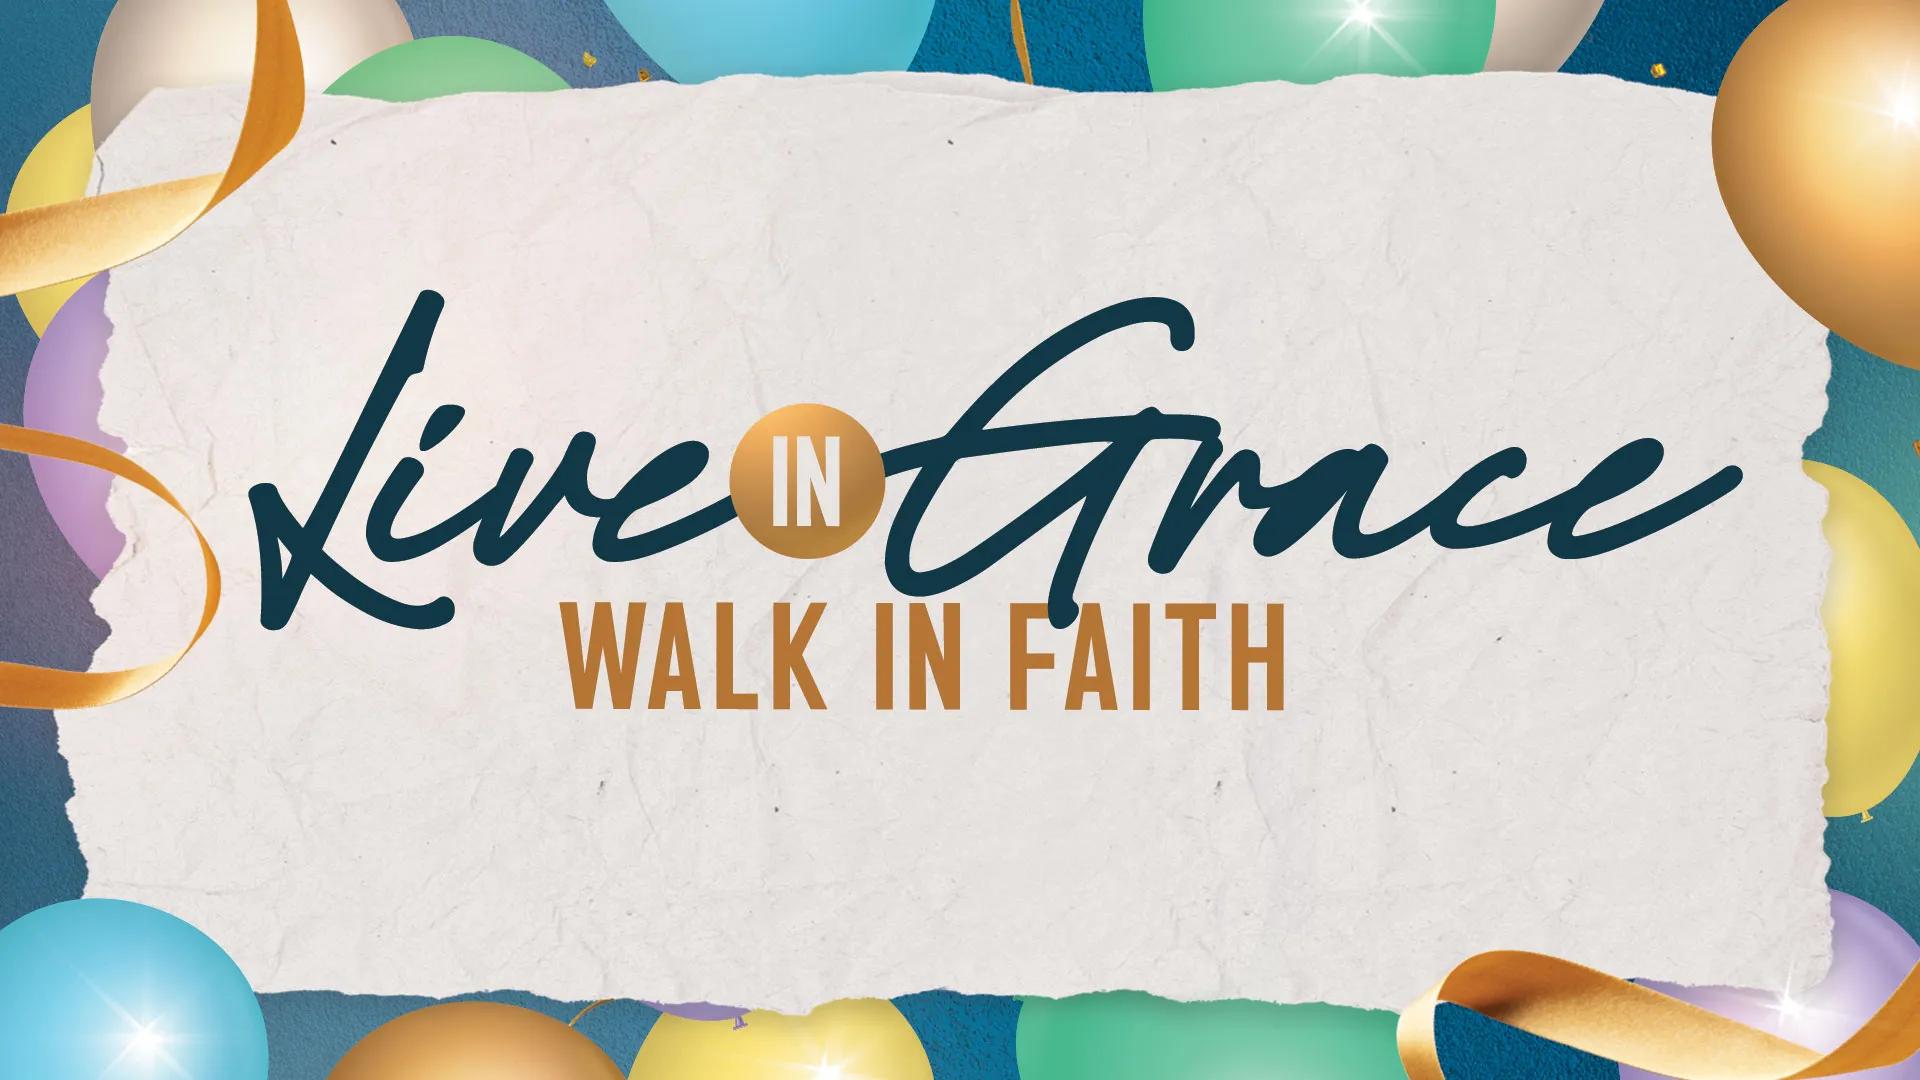 A backdrop full of balloons with the words "live in grace, walk in faith" written on a paper-like background.